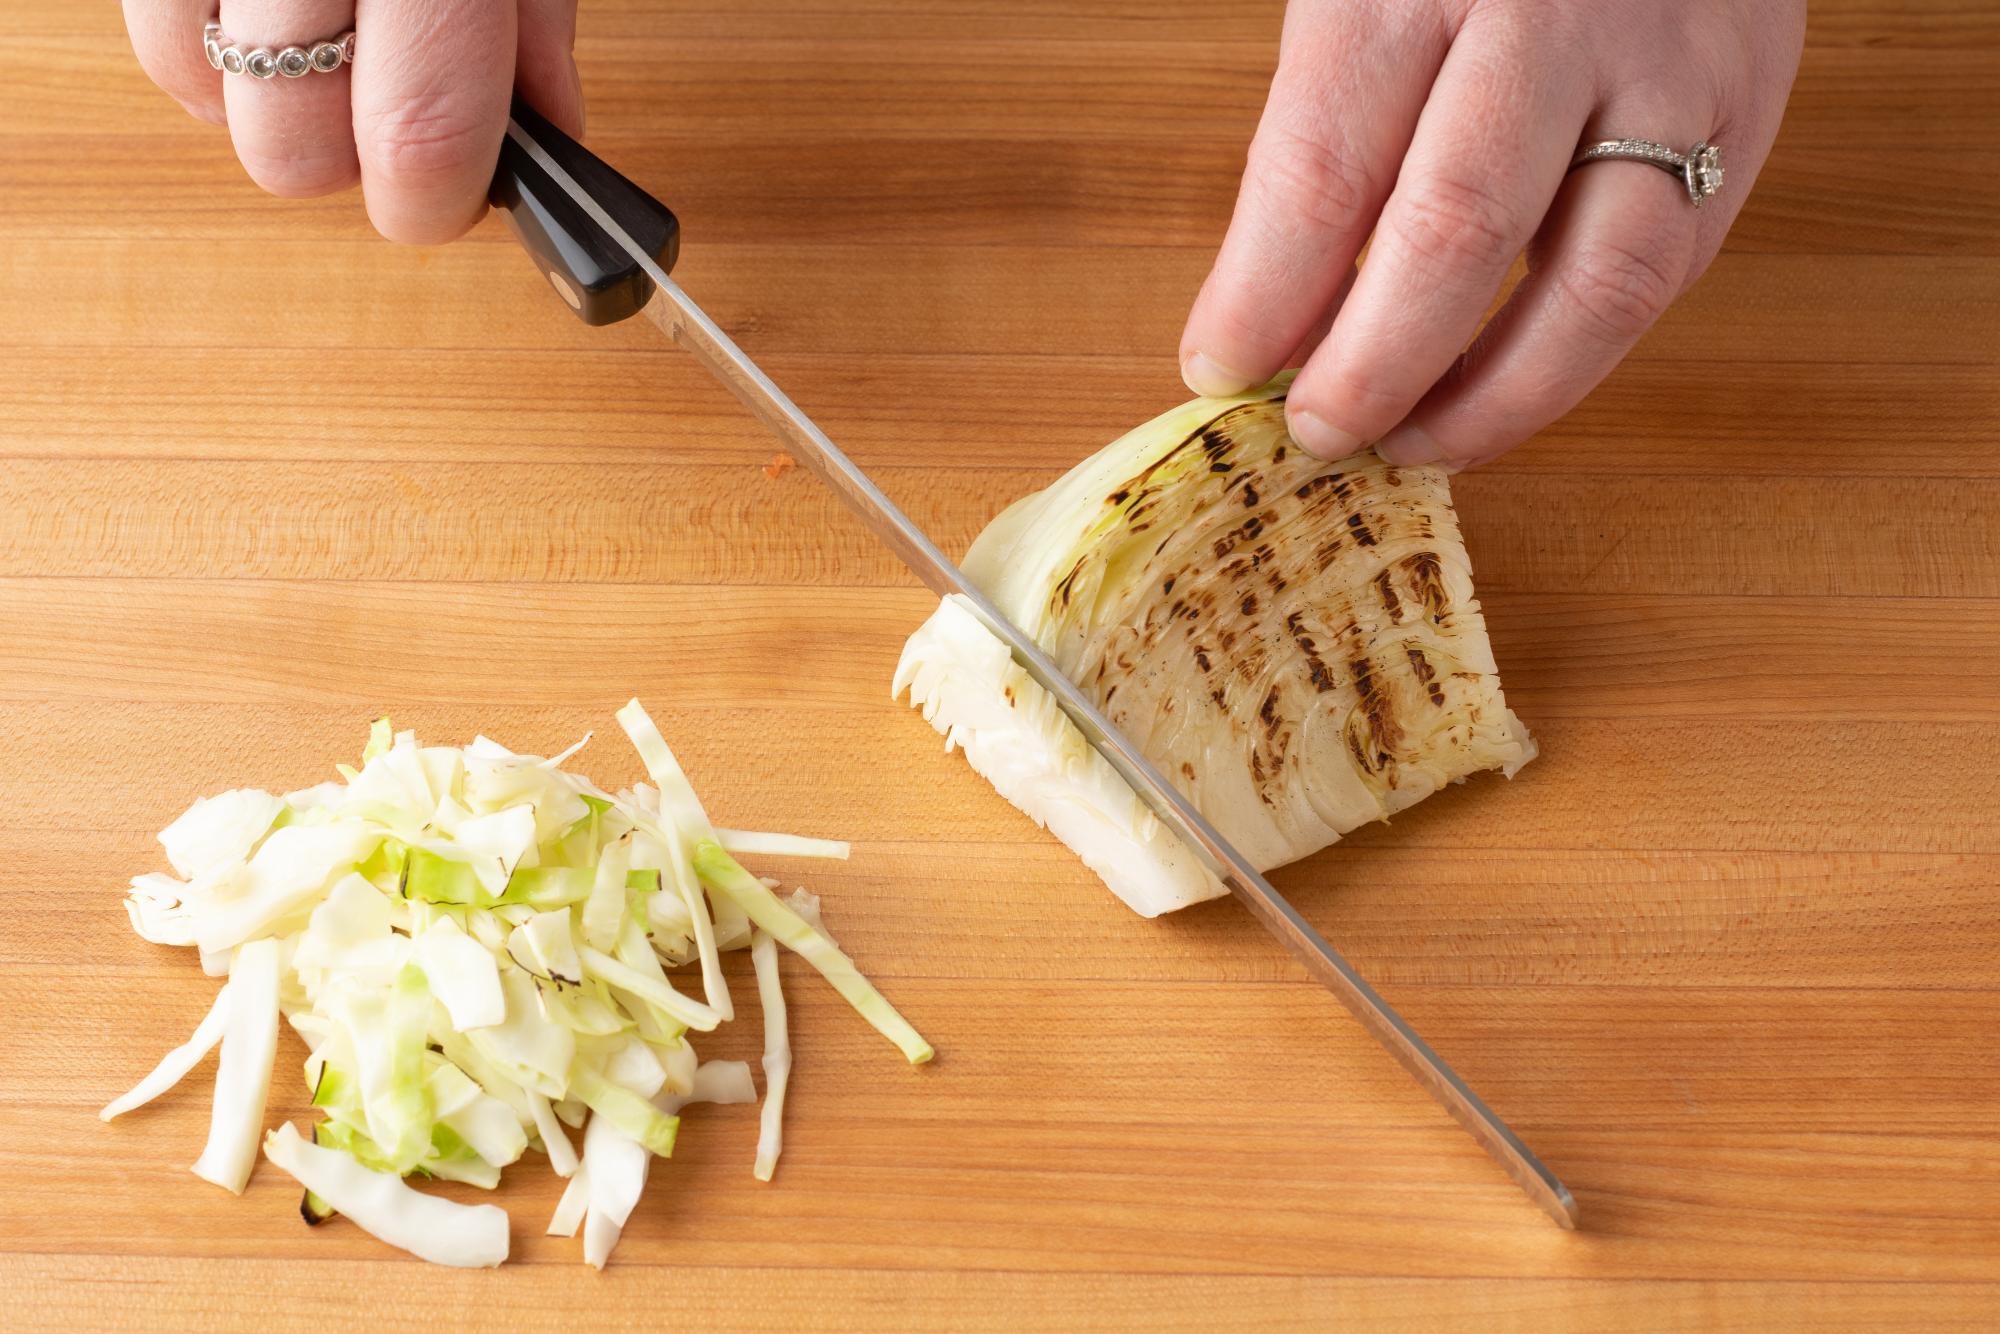 Using a Petite Slicer to cut the cabbage into thin strips.